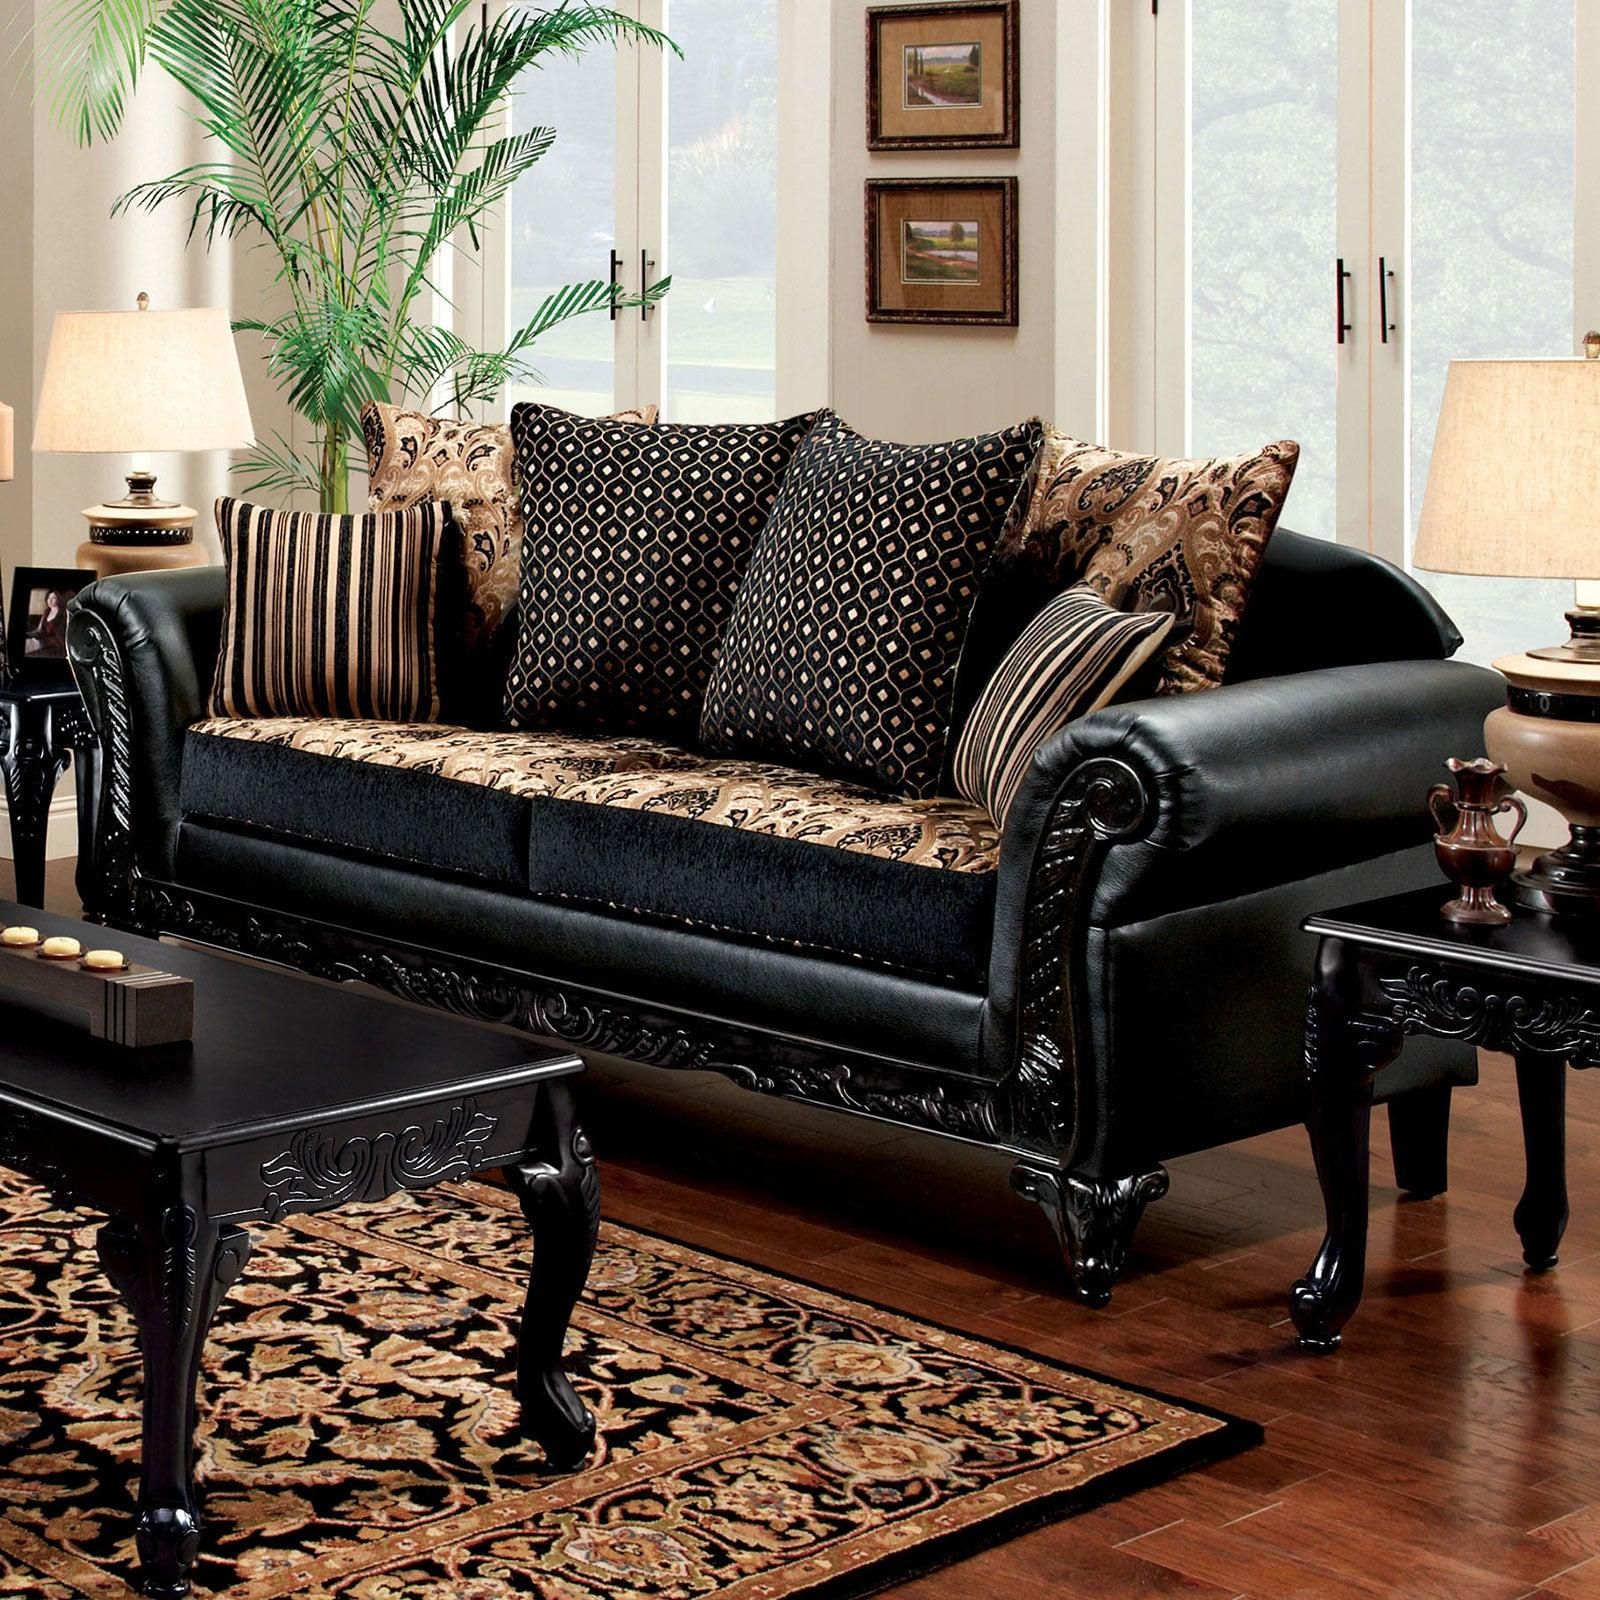 Black & Tan Chenille Sofa Theodora Sm7505n Sf Foa Traditional – Buy Online  On Ny Furniture Outlet For Traditional Black Fabric Sofas (View 3 of 15)